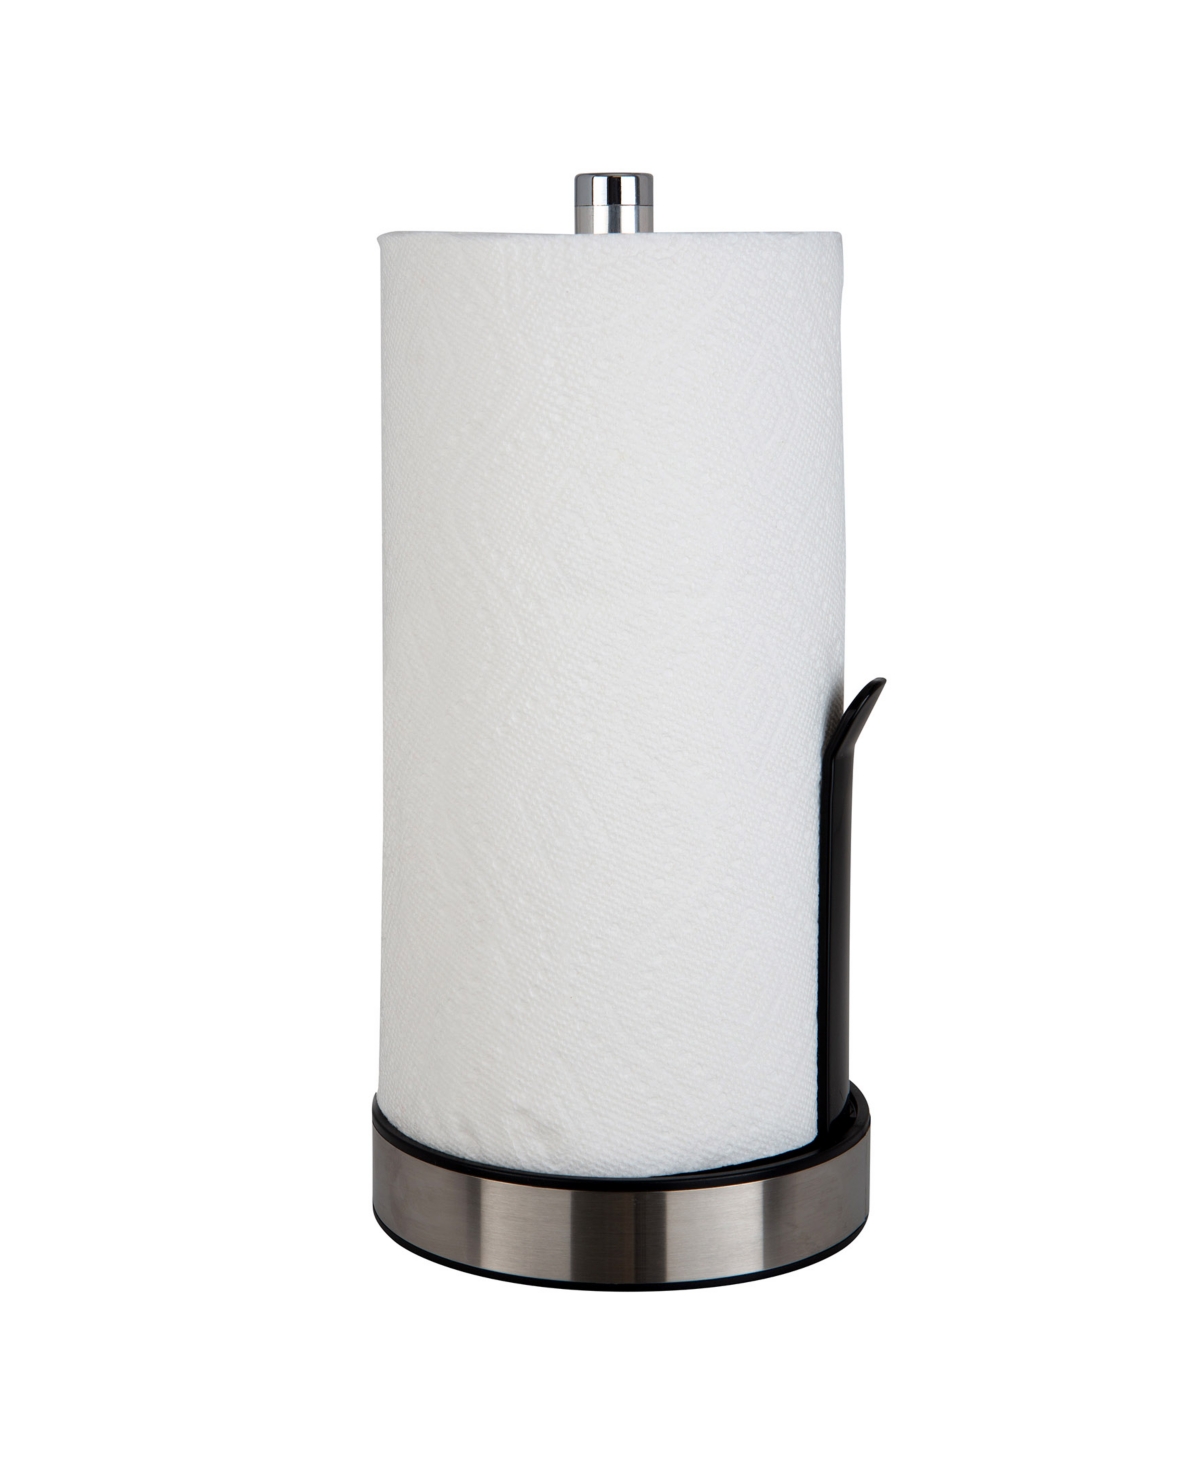 Paper Towel Holder with Deluxe Tension Arm - Black